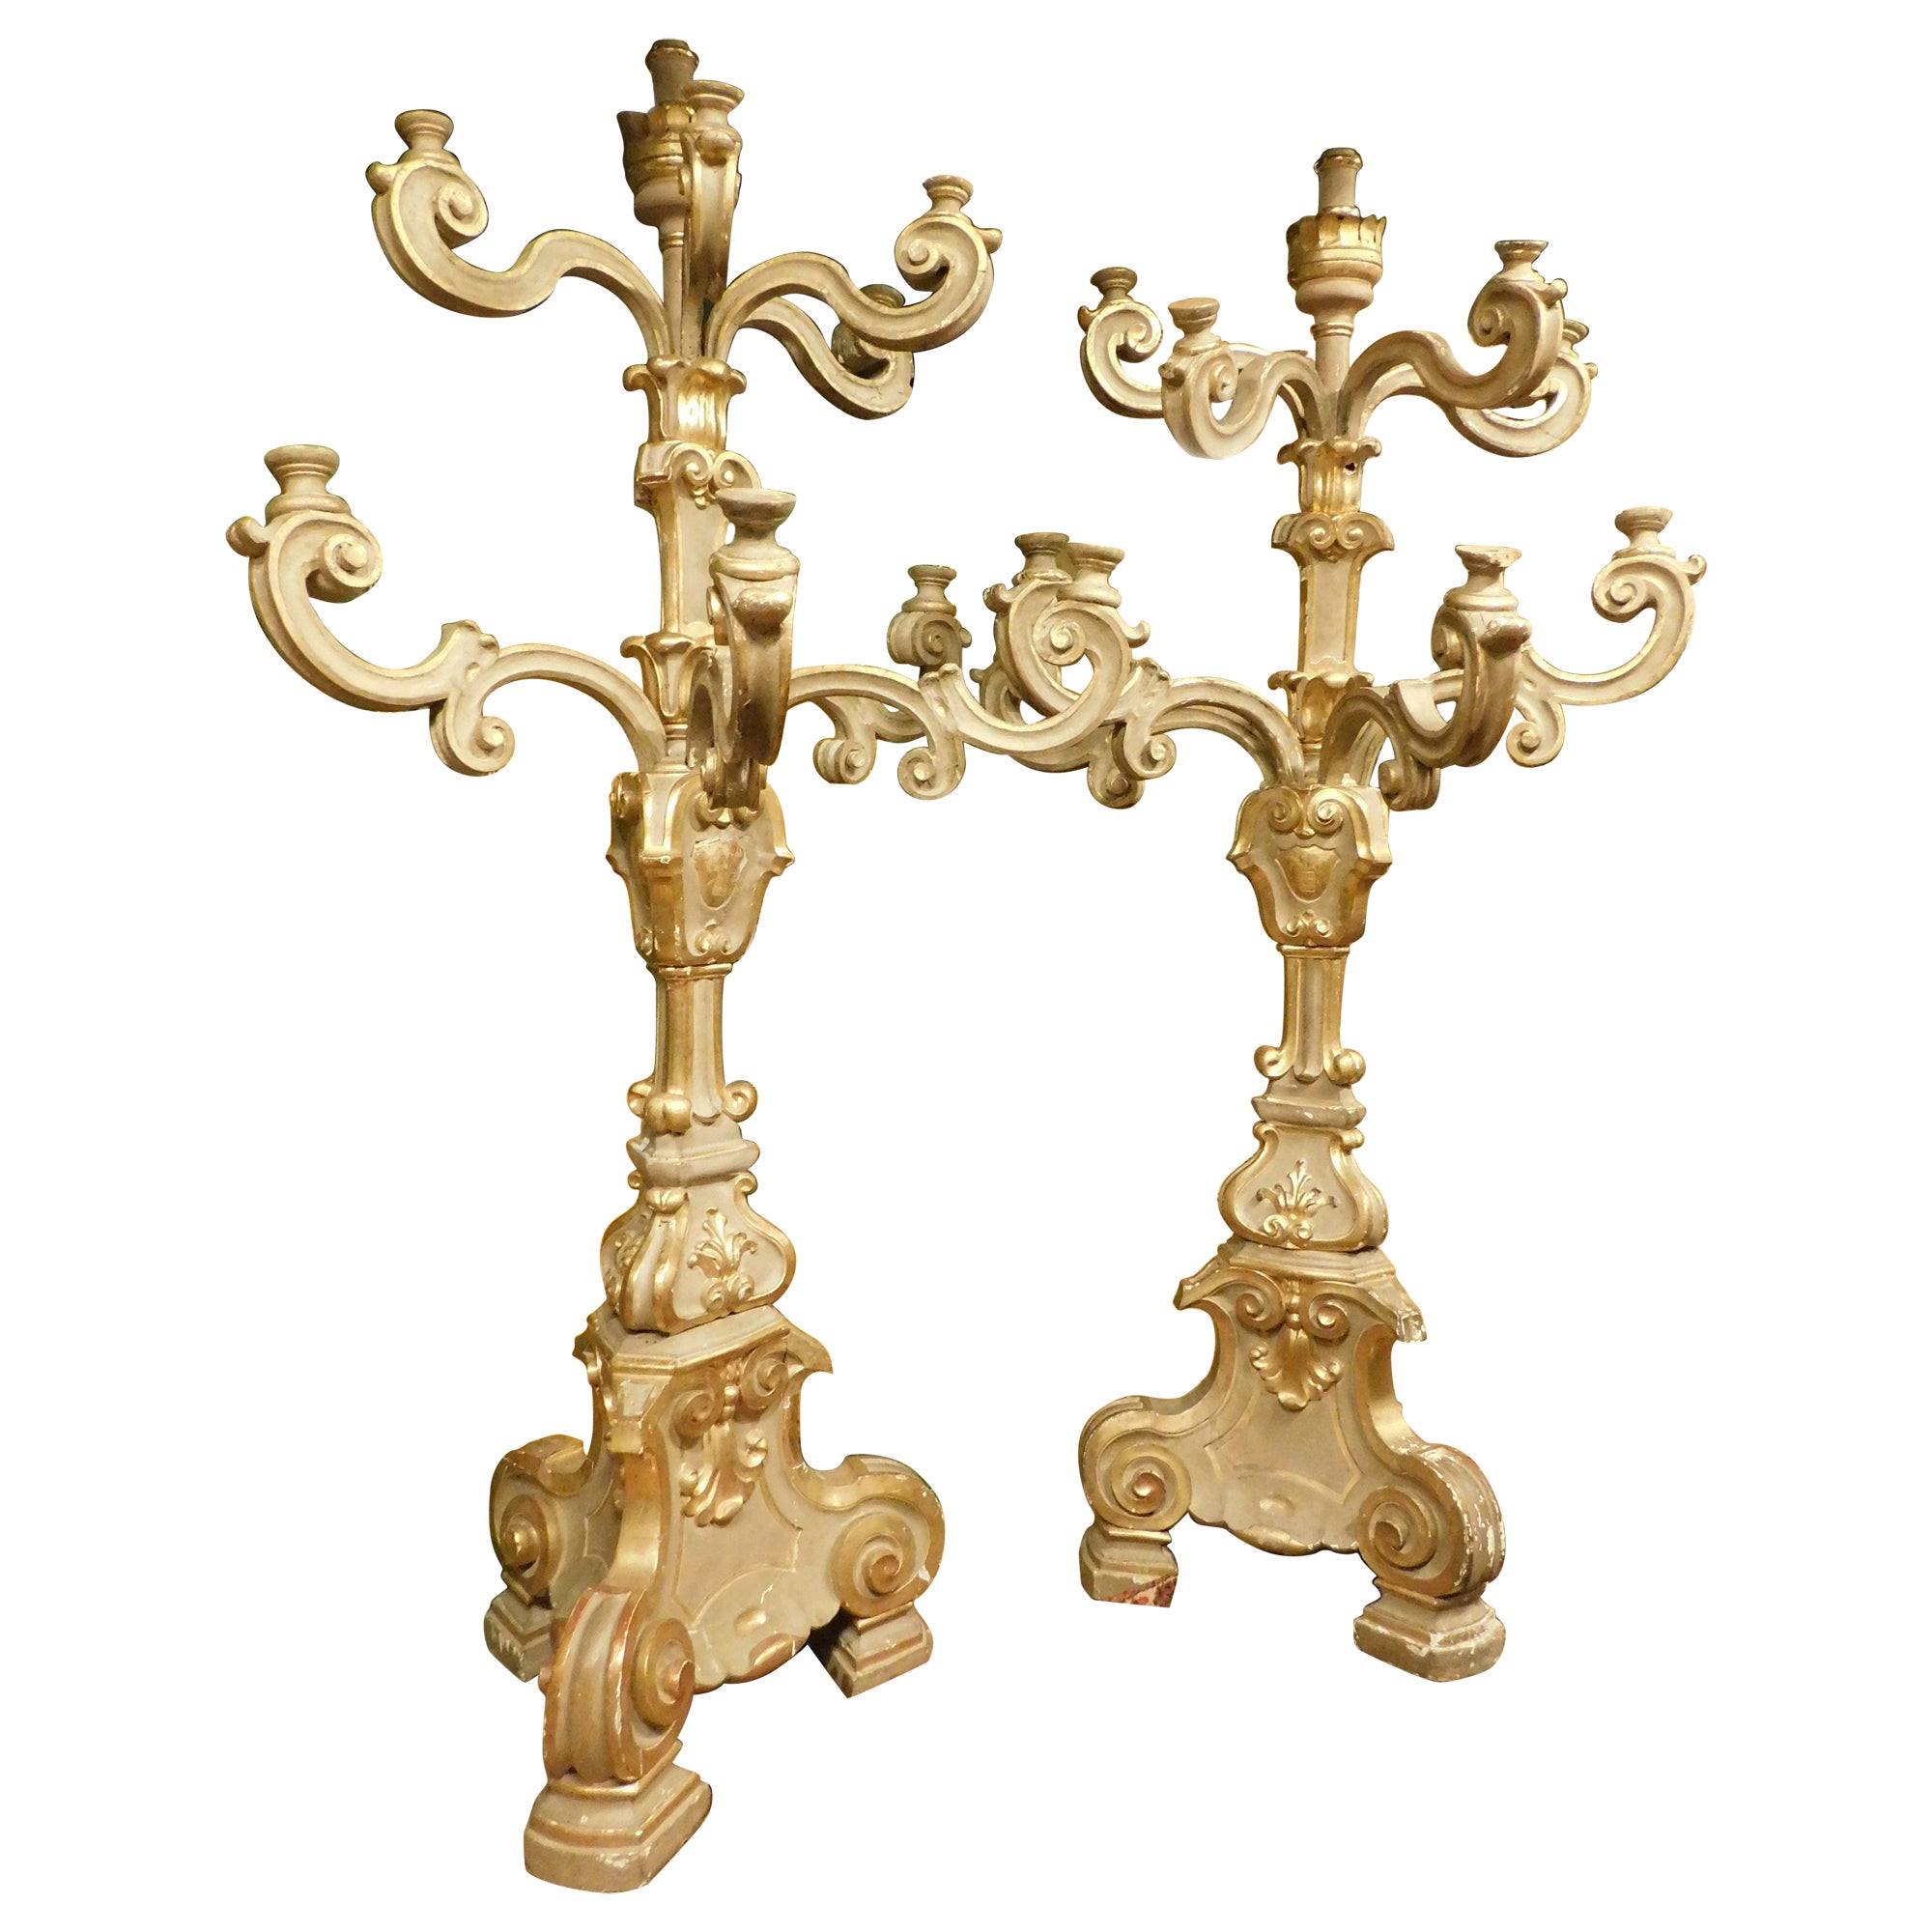 Antique pair of big gilded and carved wooden candlesticks, Florence (Italy)